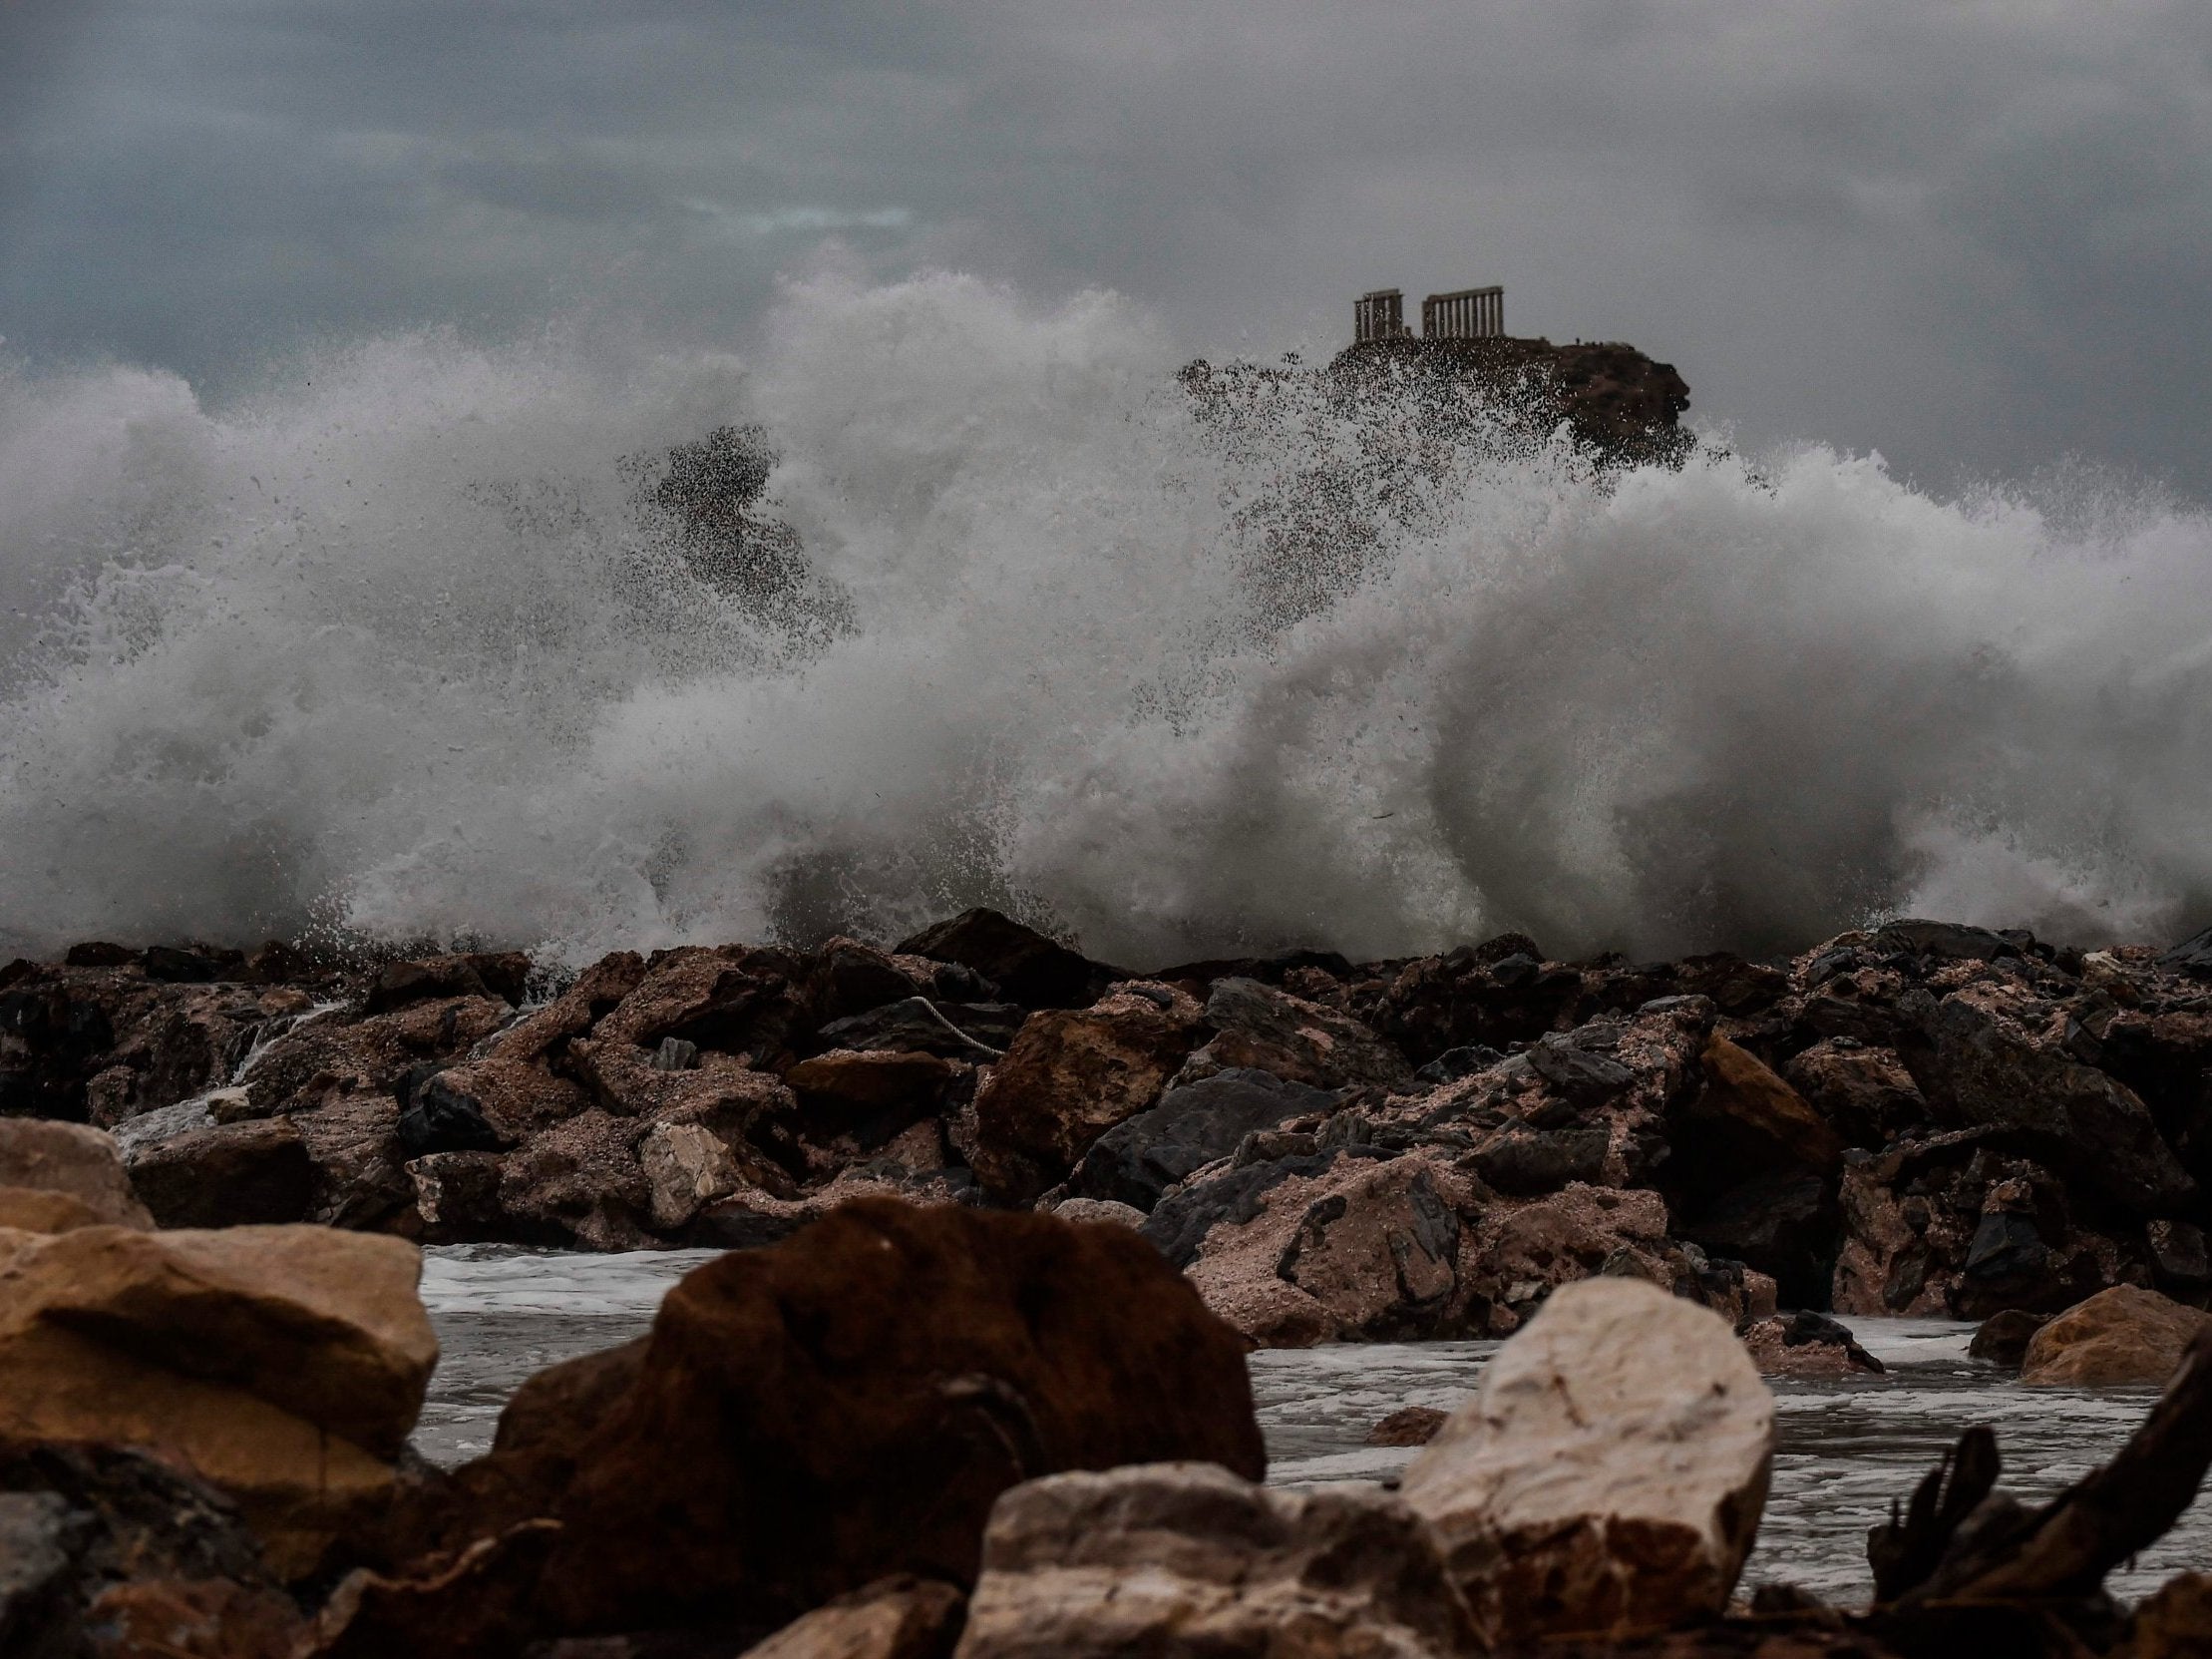 Waves hit the cliffs in front of the ancient Temple of Poseidon at cape Sounion, in southern Athens during bad weather